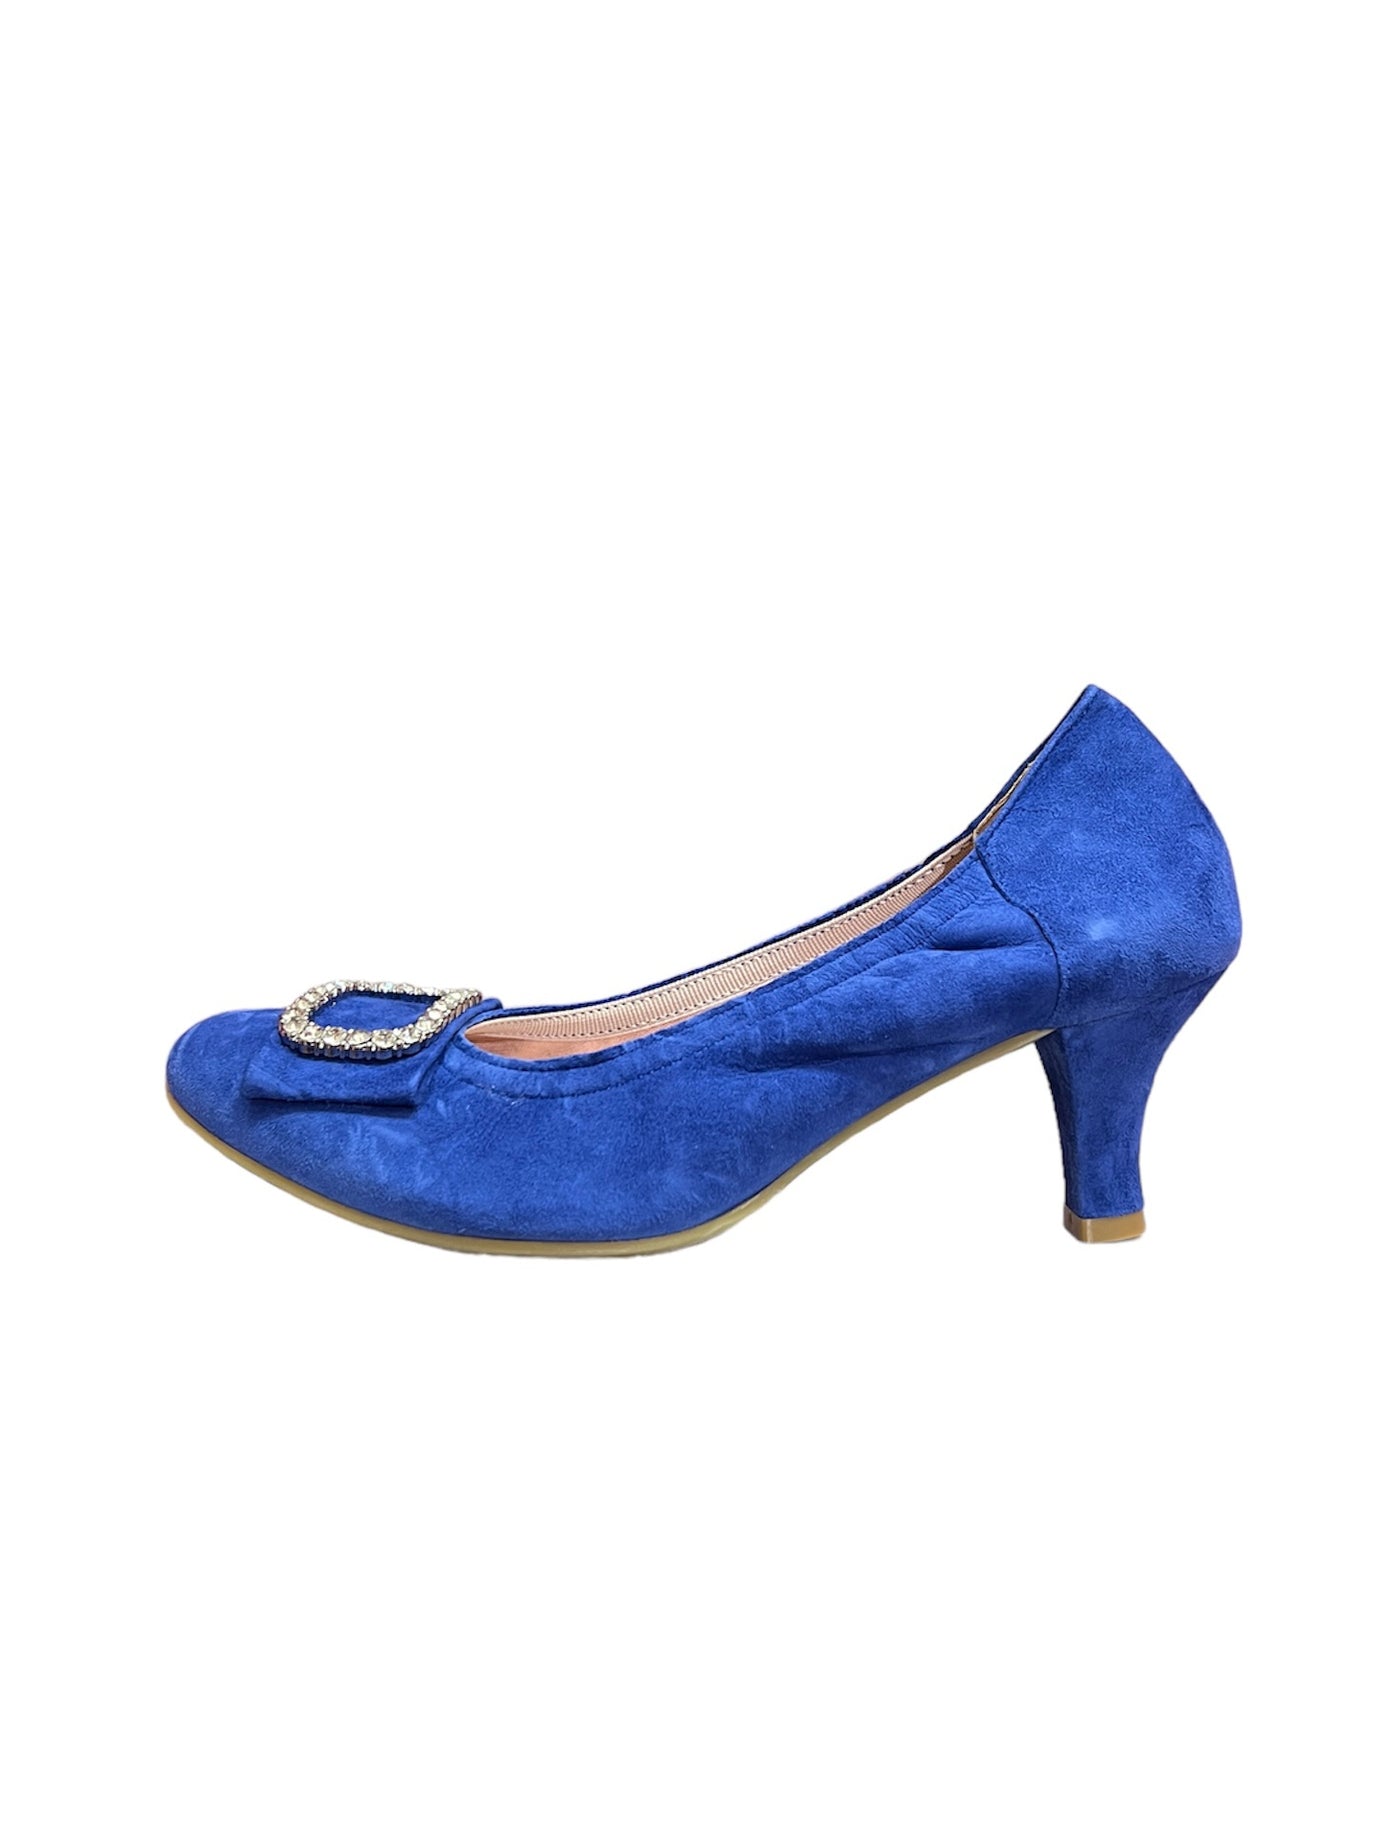 Royal Blue Low Heel Shoe With Buckle on Toe